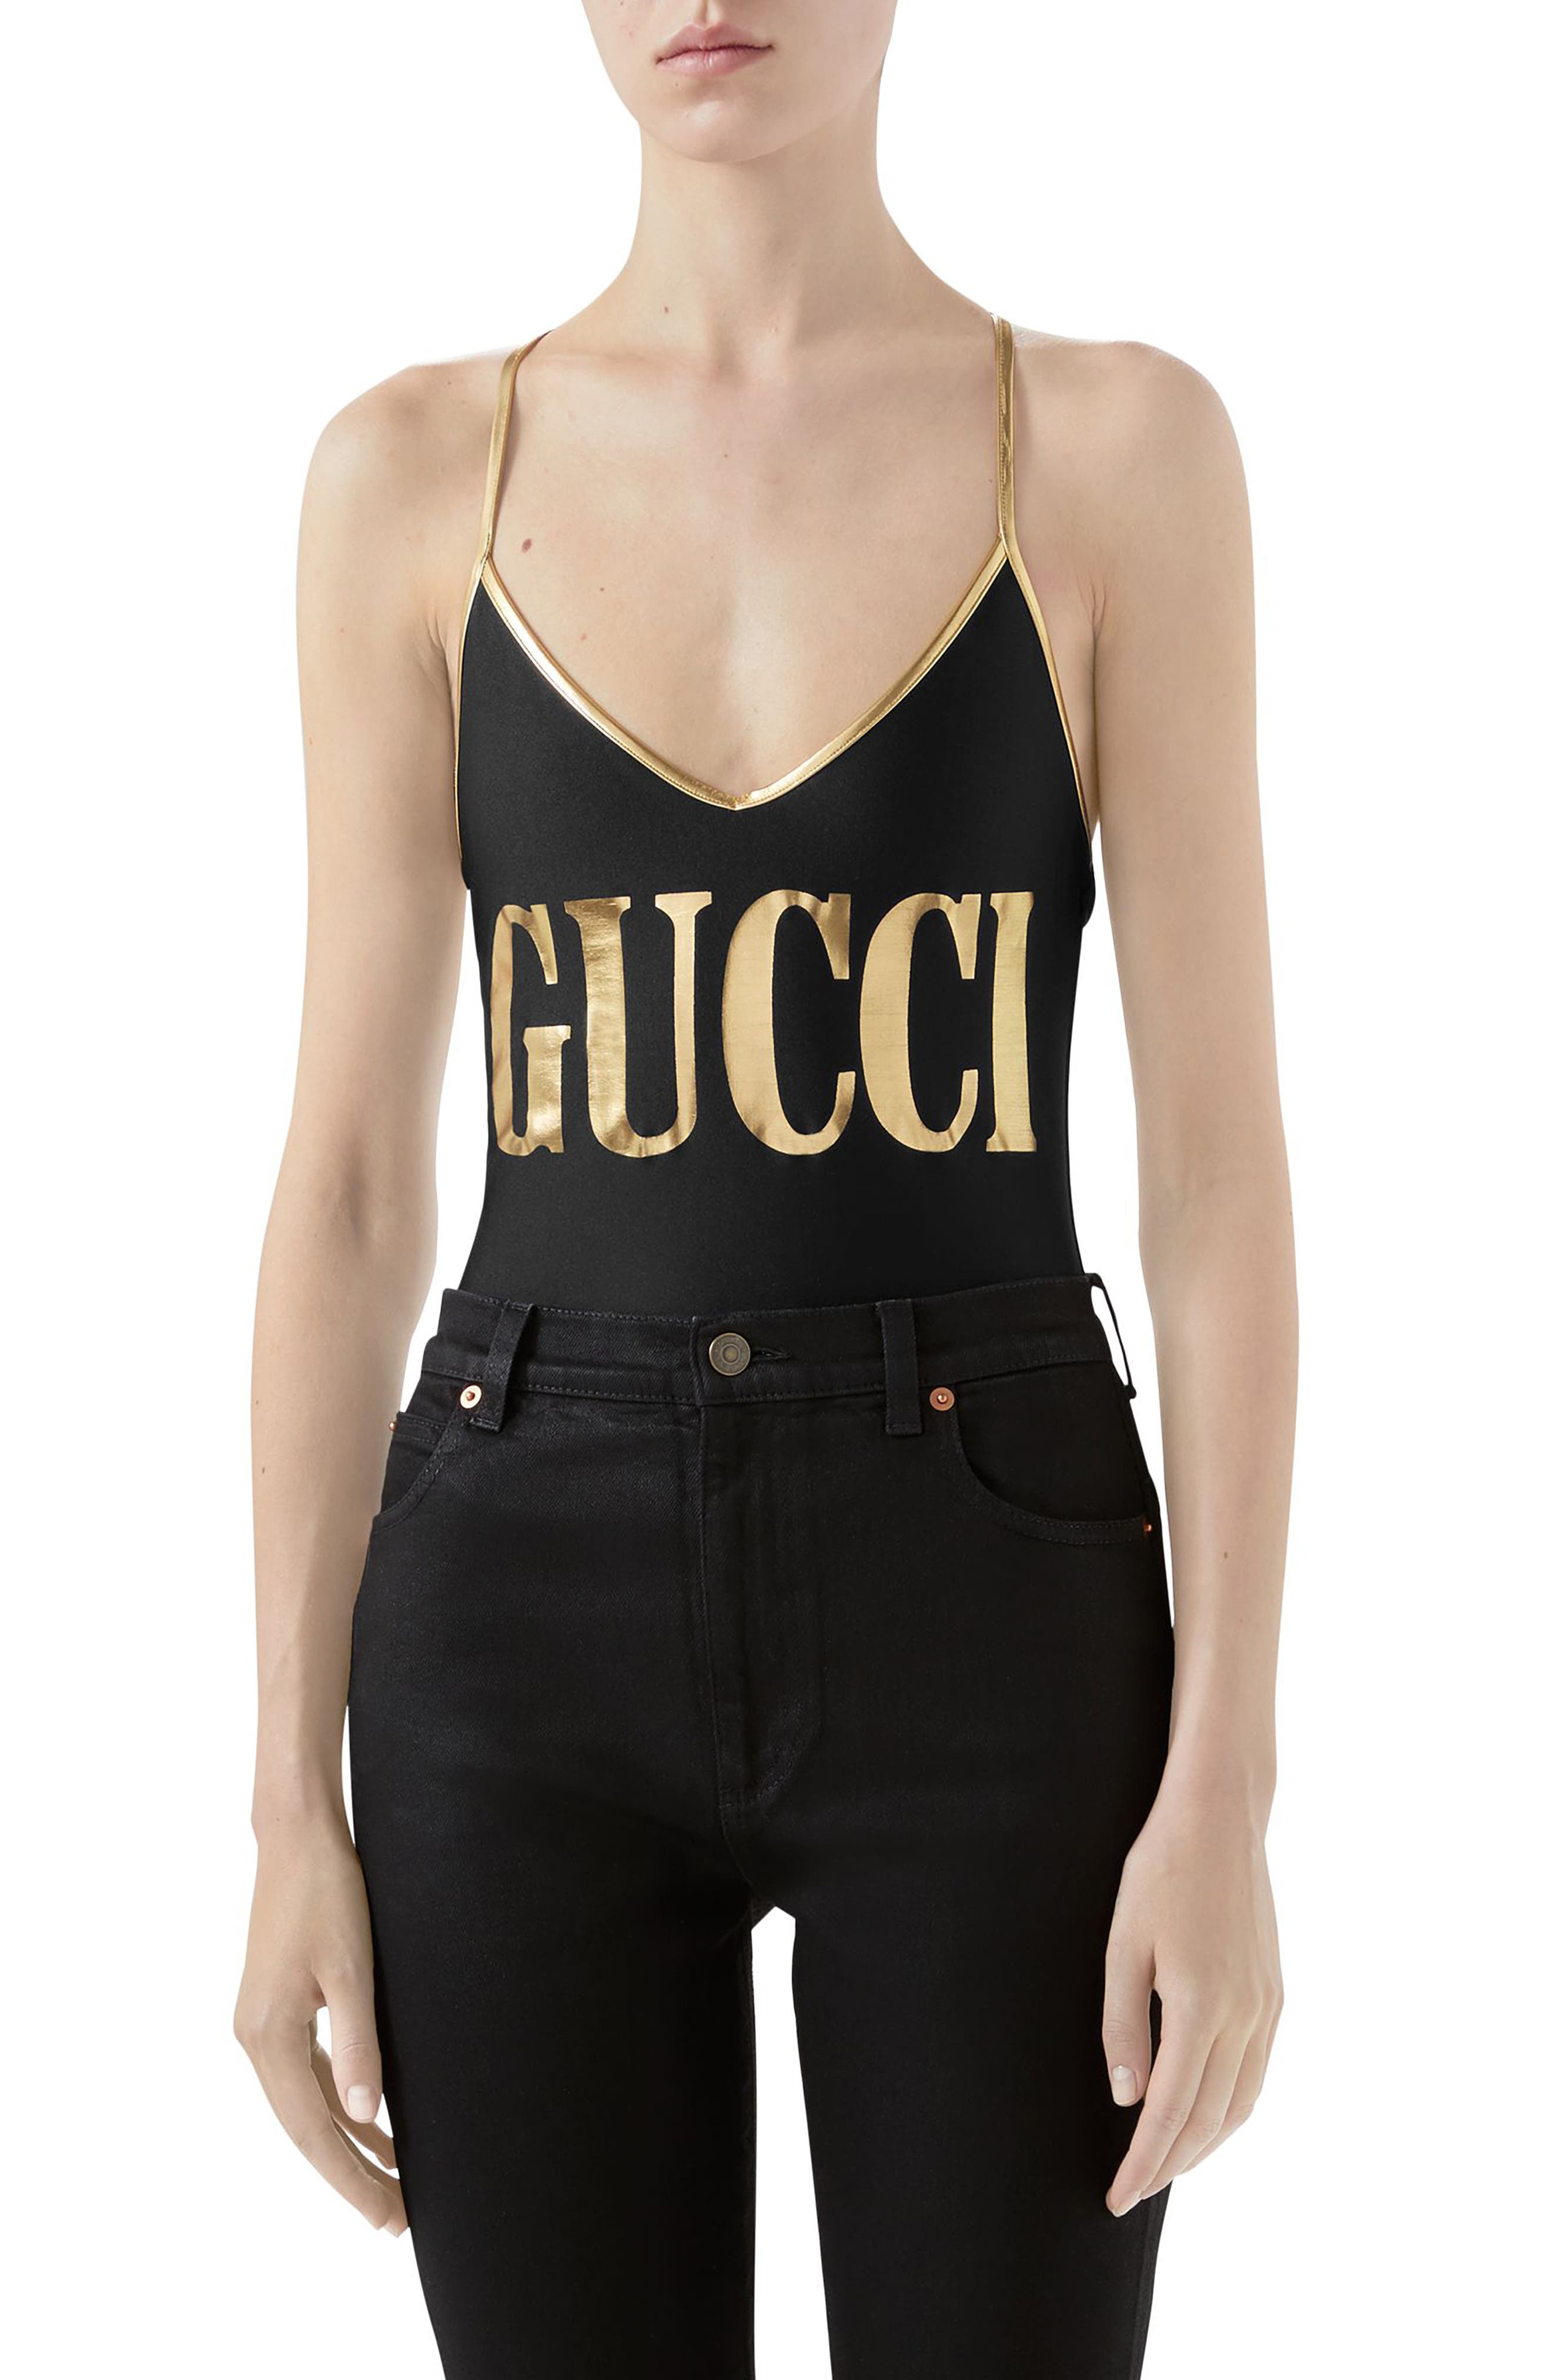 Girls Gucci Swimsuit Online Sale, TO 64% OFF